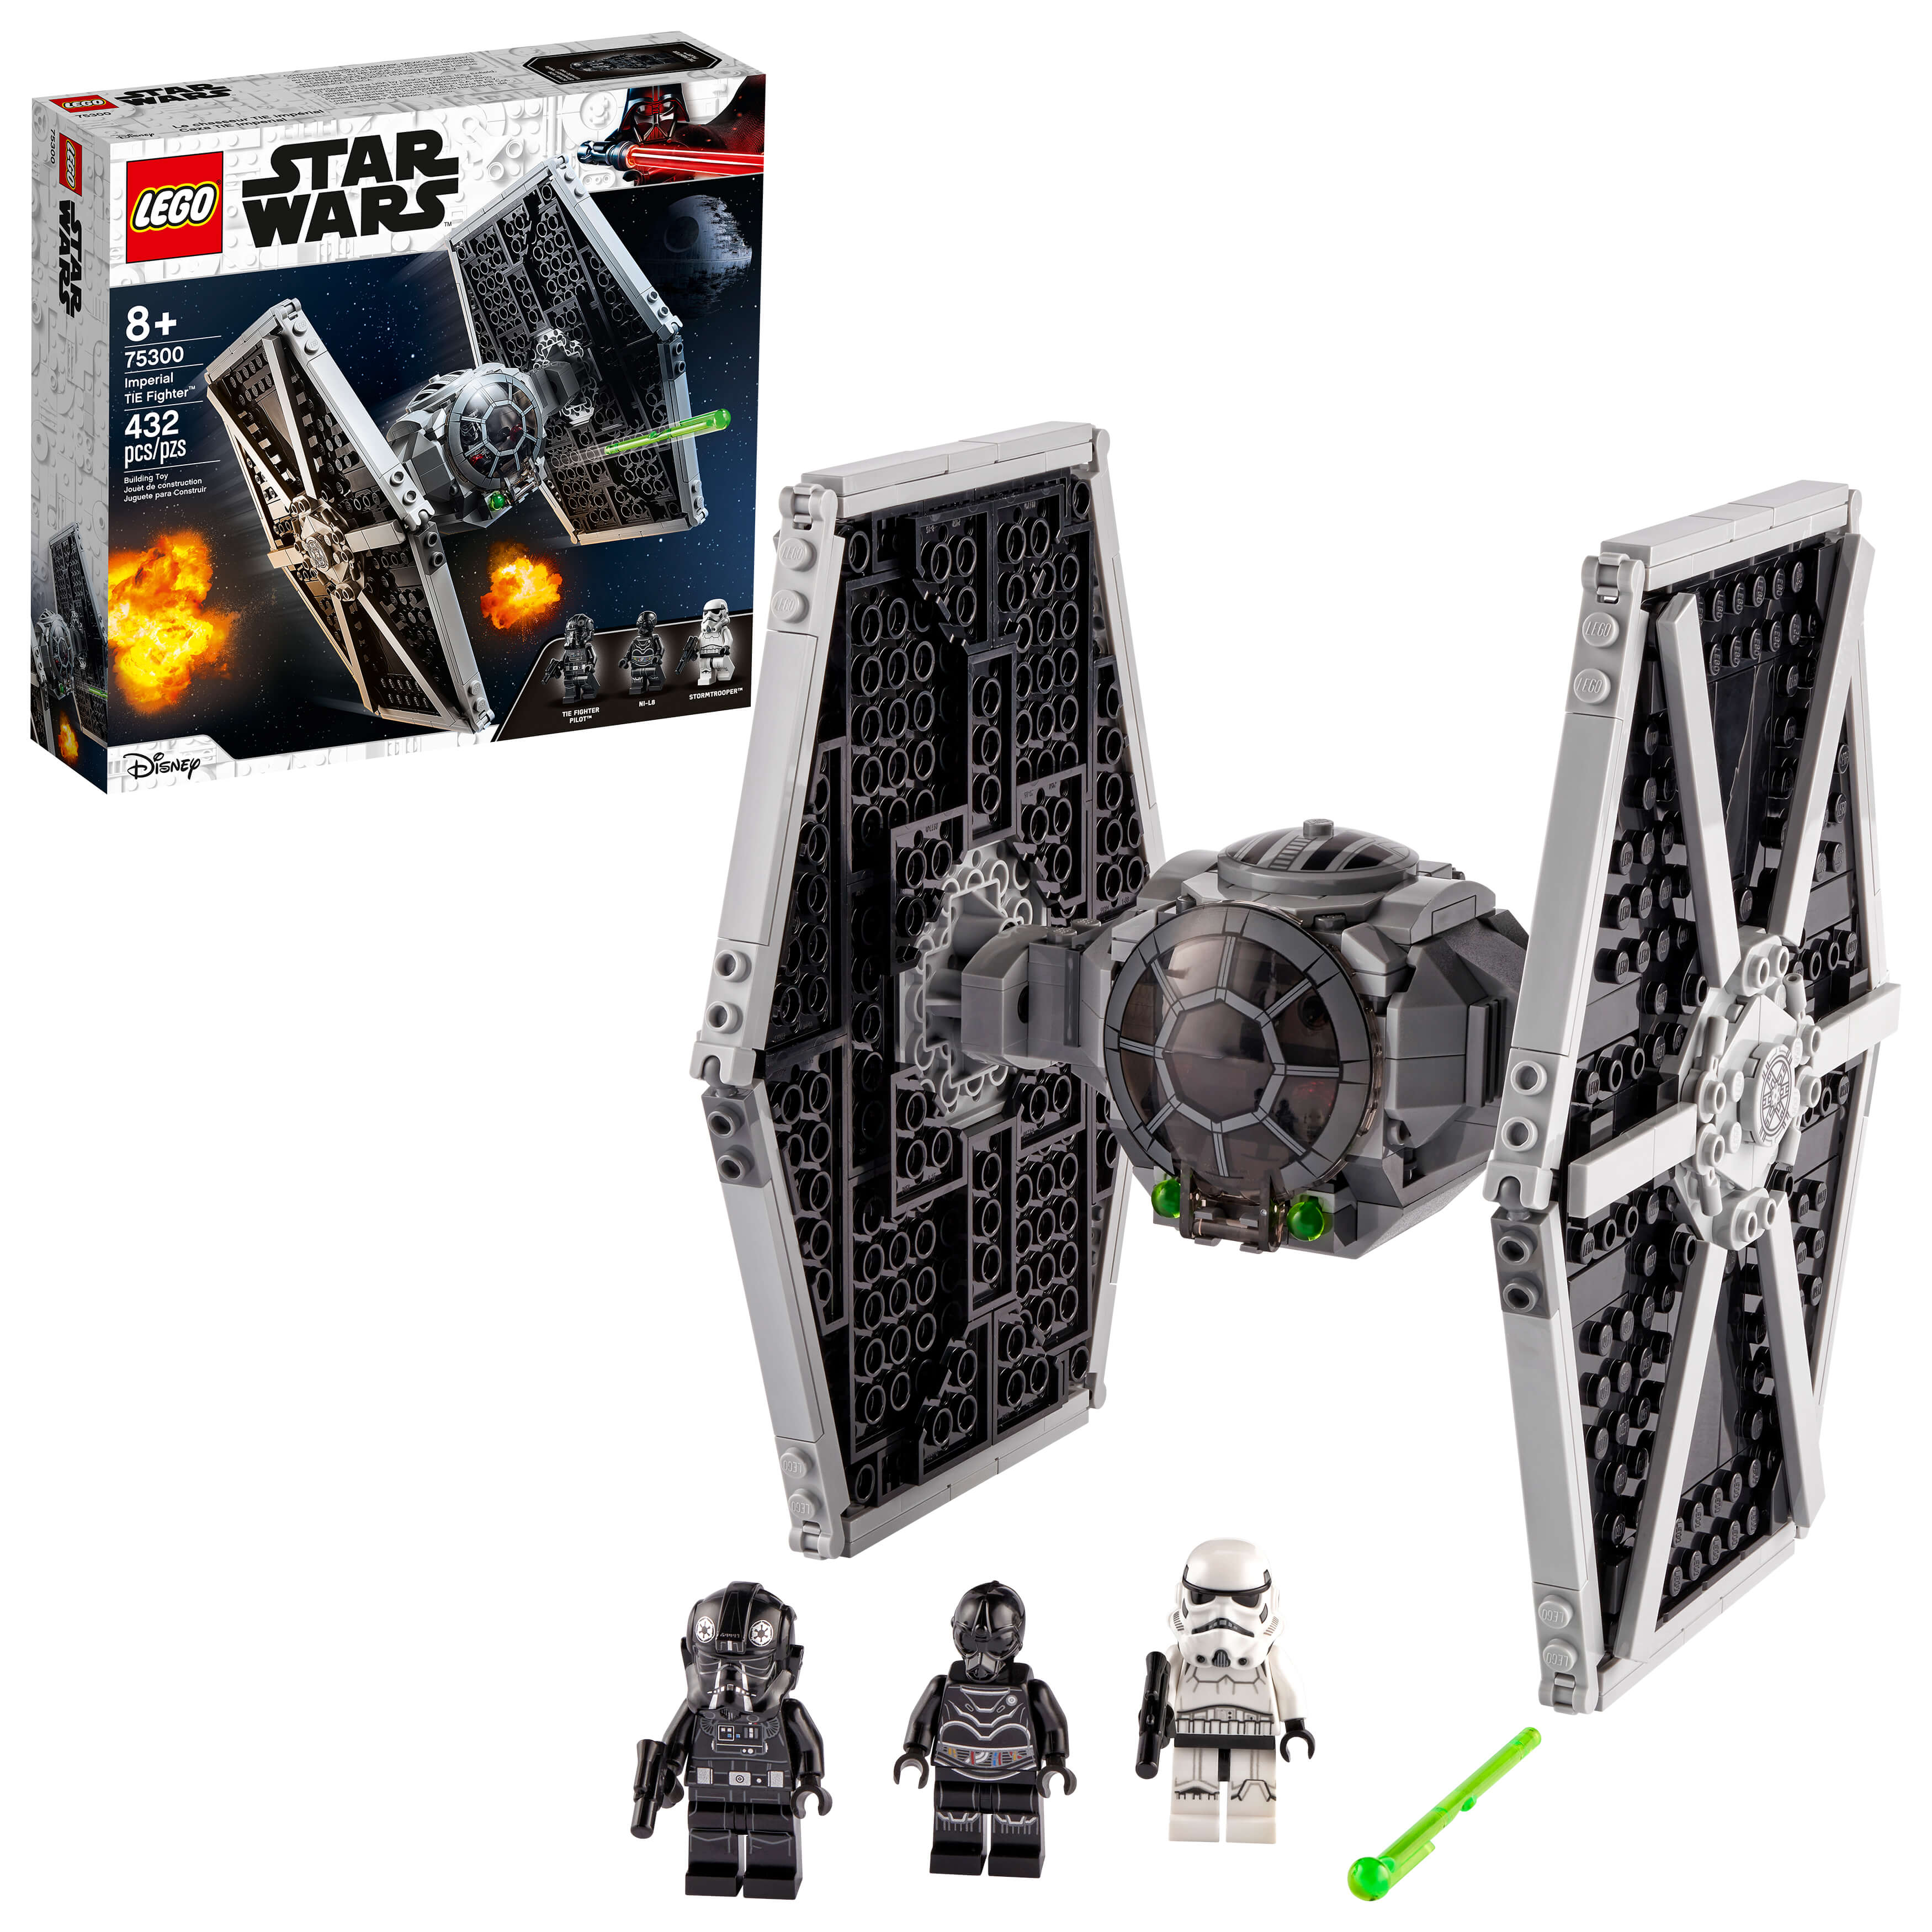 LEGO® Star Wars® Imperial TIE Fighter 75300 Building Kit (432 Pieces)